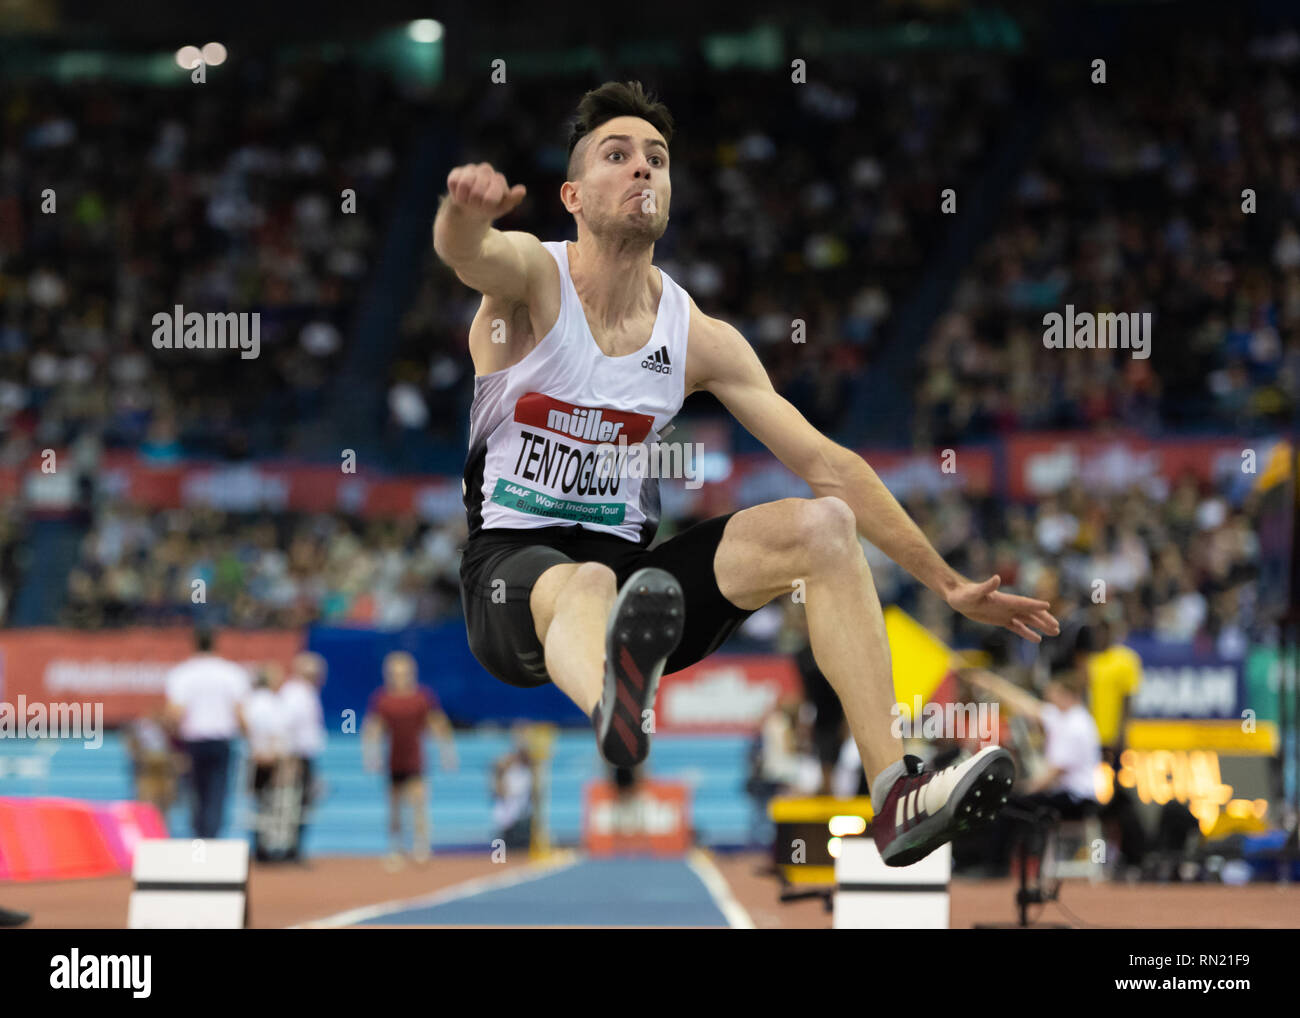 Long Jump High Resolution Stock Photography and Images - Alamy